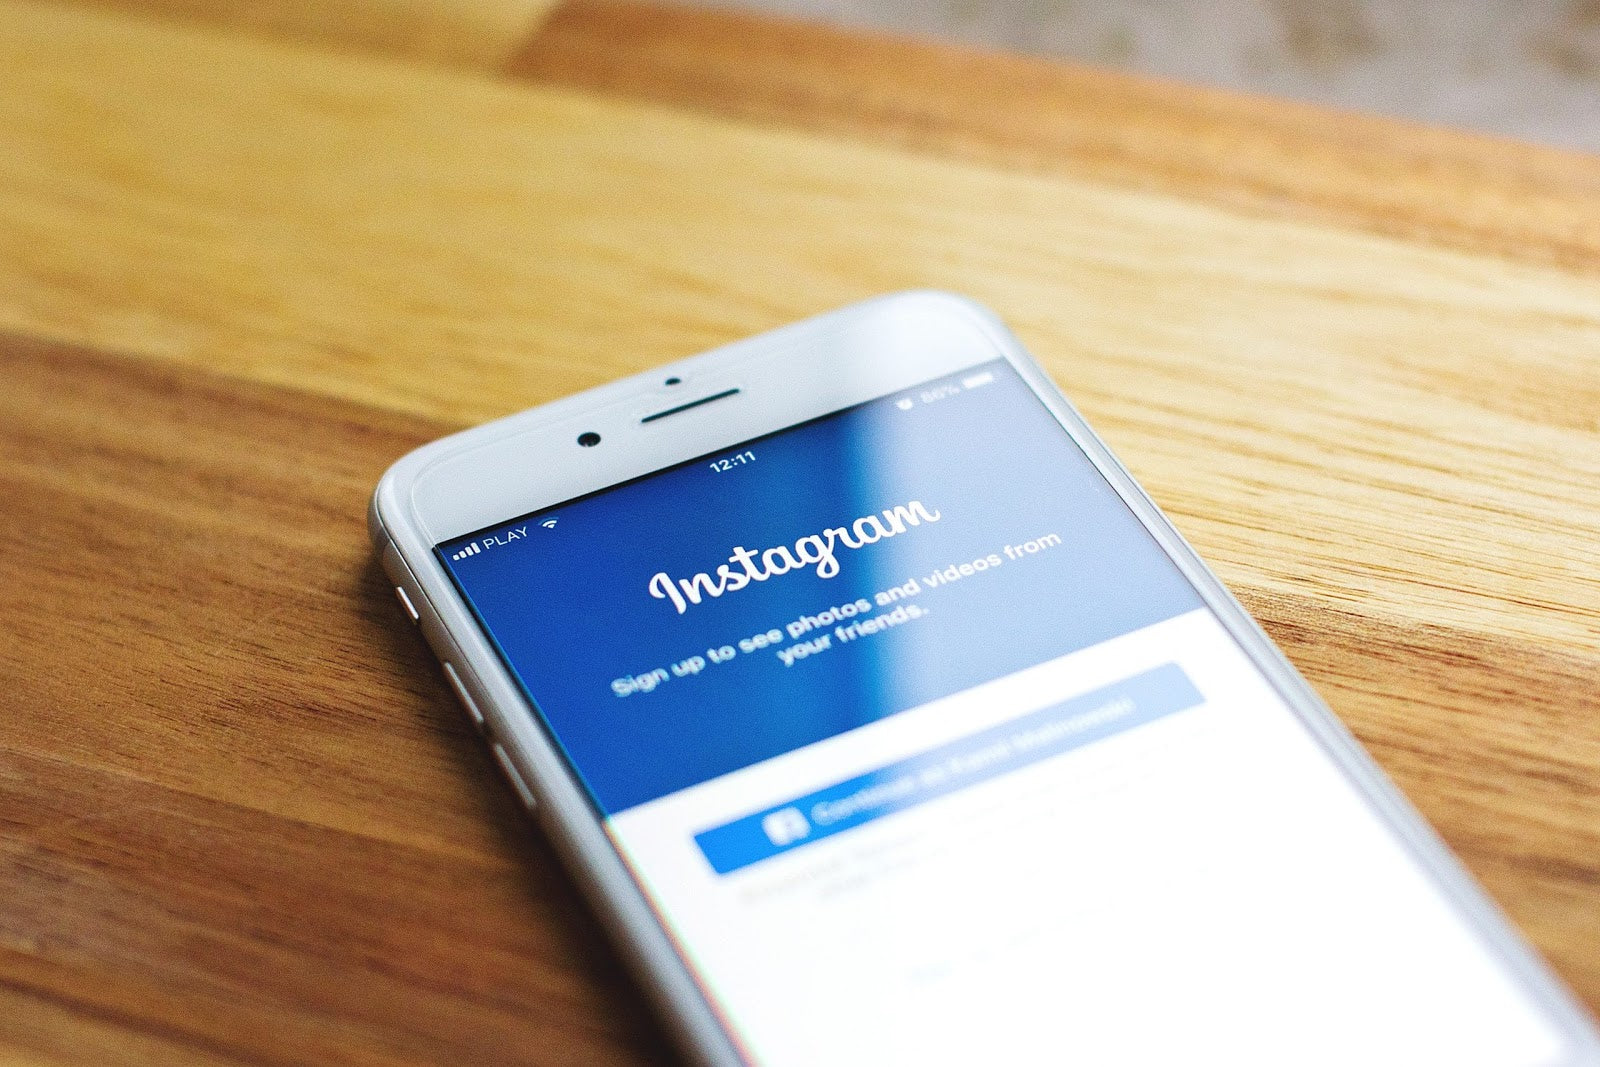 Here are 5 Instagram Marketing Tips For Beginners